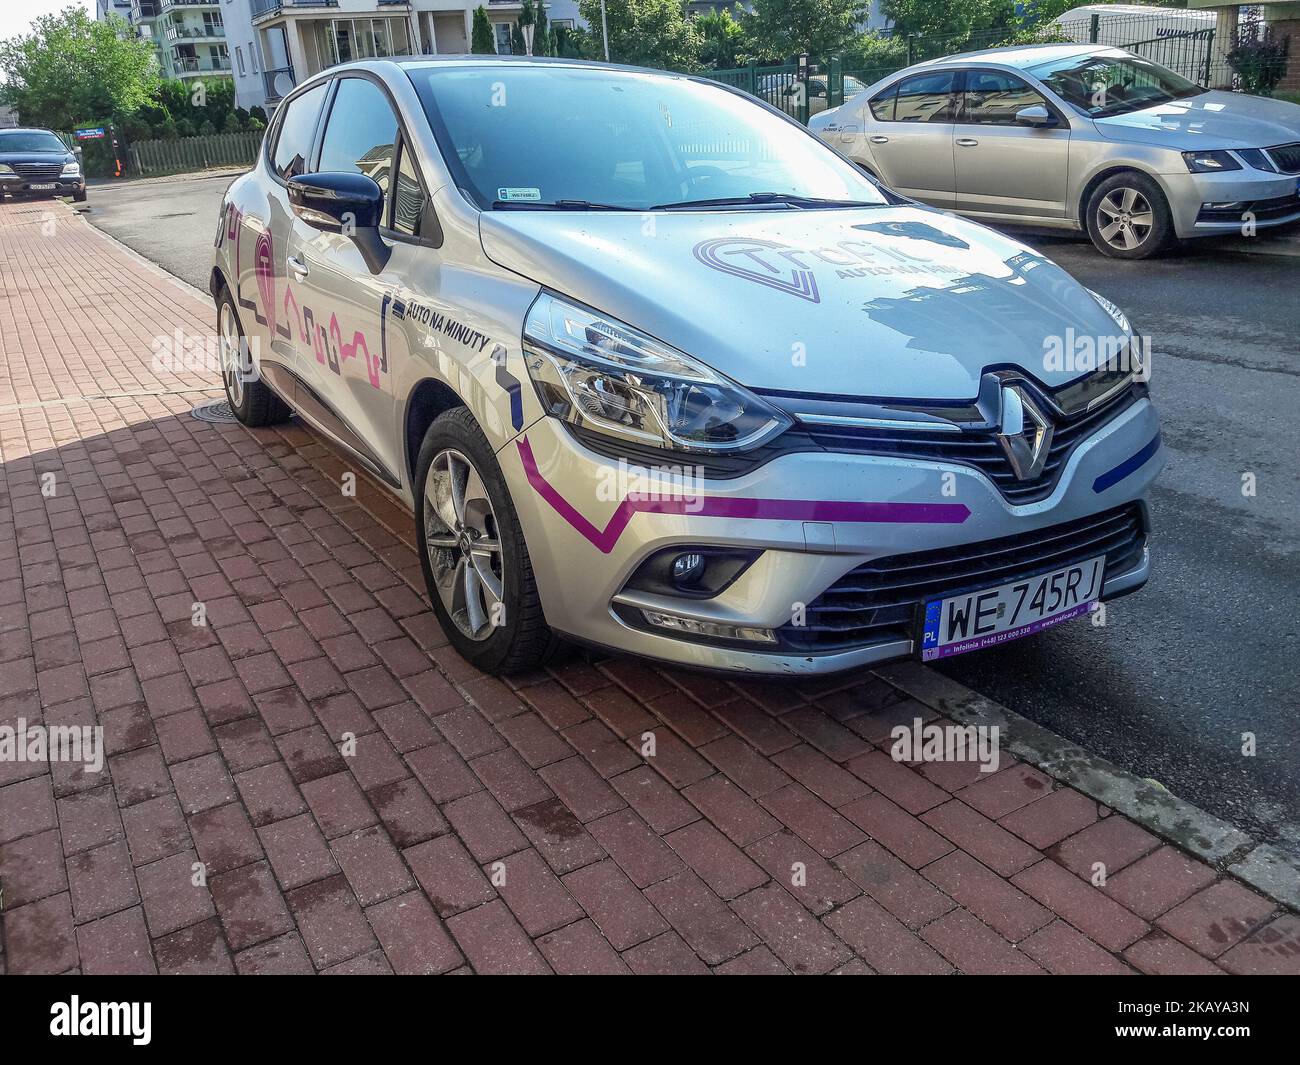 Renault Clio car belonging to Traficar carsharing company is seen in Gdansk, Poland on 11 June 2018 People can rent cars for short periods of time, often even for few minutes. Traficar offers their services in few big Polish cities. (Photo by Michal Fludra/NurPhoto) Stock Photo